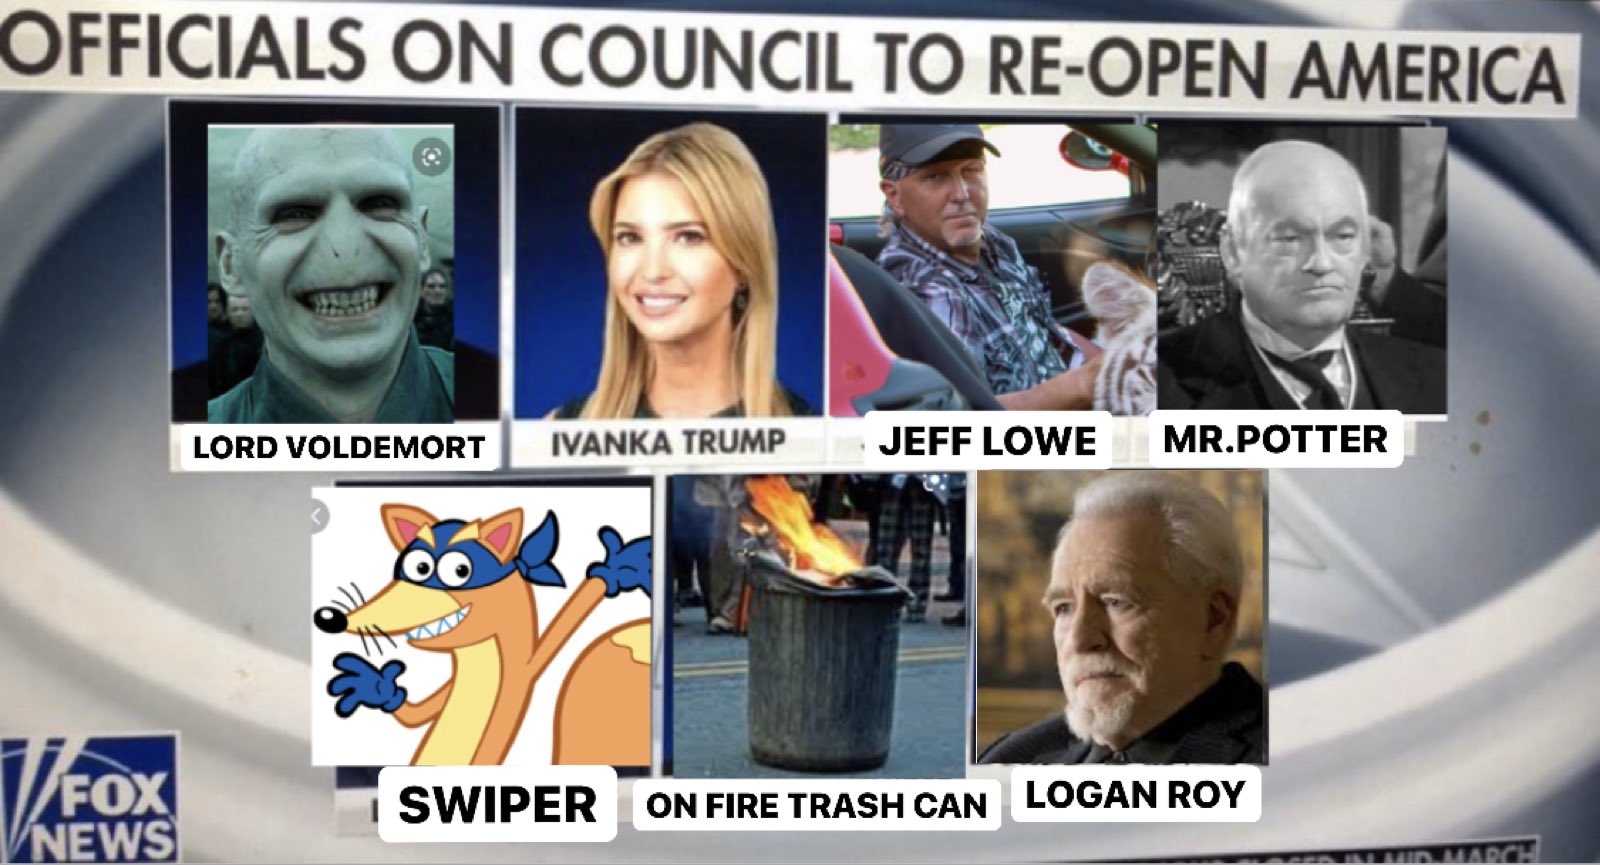 photo caption - Officials On Council To ReOpen America Lord Voldemort Ivanka Trump Jeff Lowe Mr.Potter On Fire Trash Can Logan Roy Fox News Marce